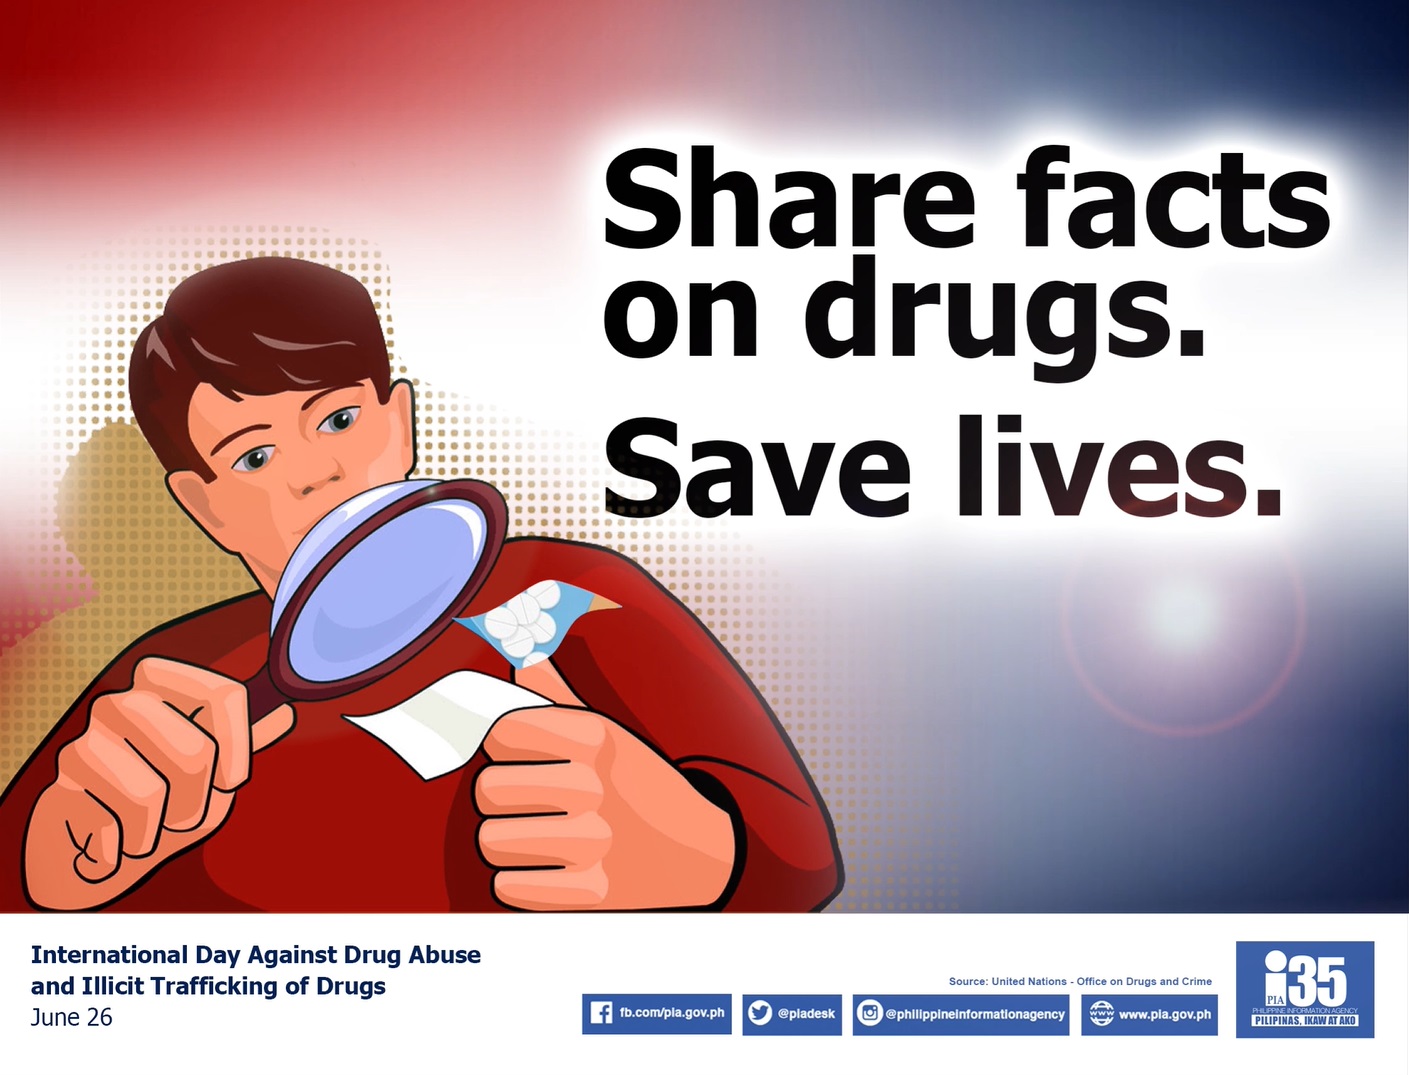 International Day Against Drug Abuse And Illicit Trafficking of Drugs